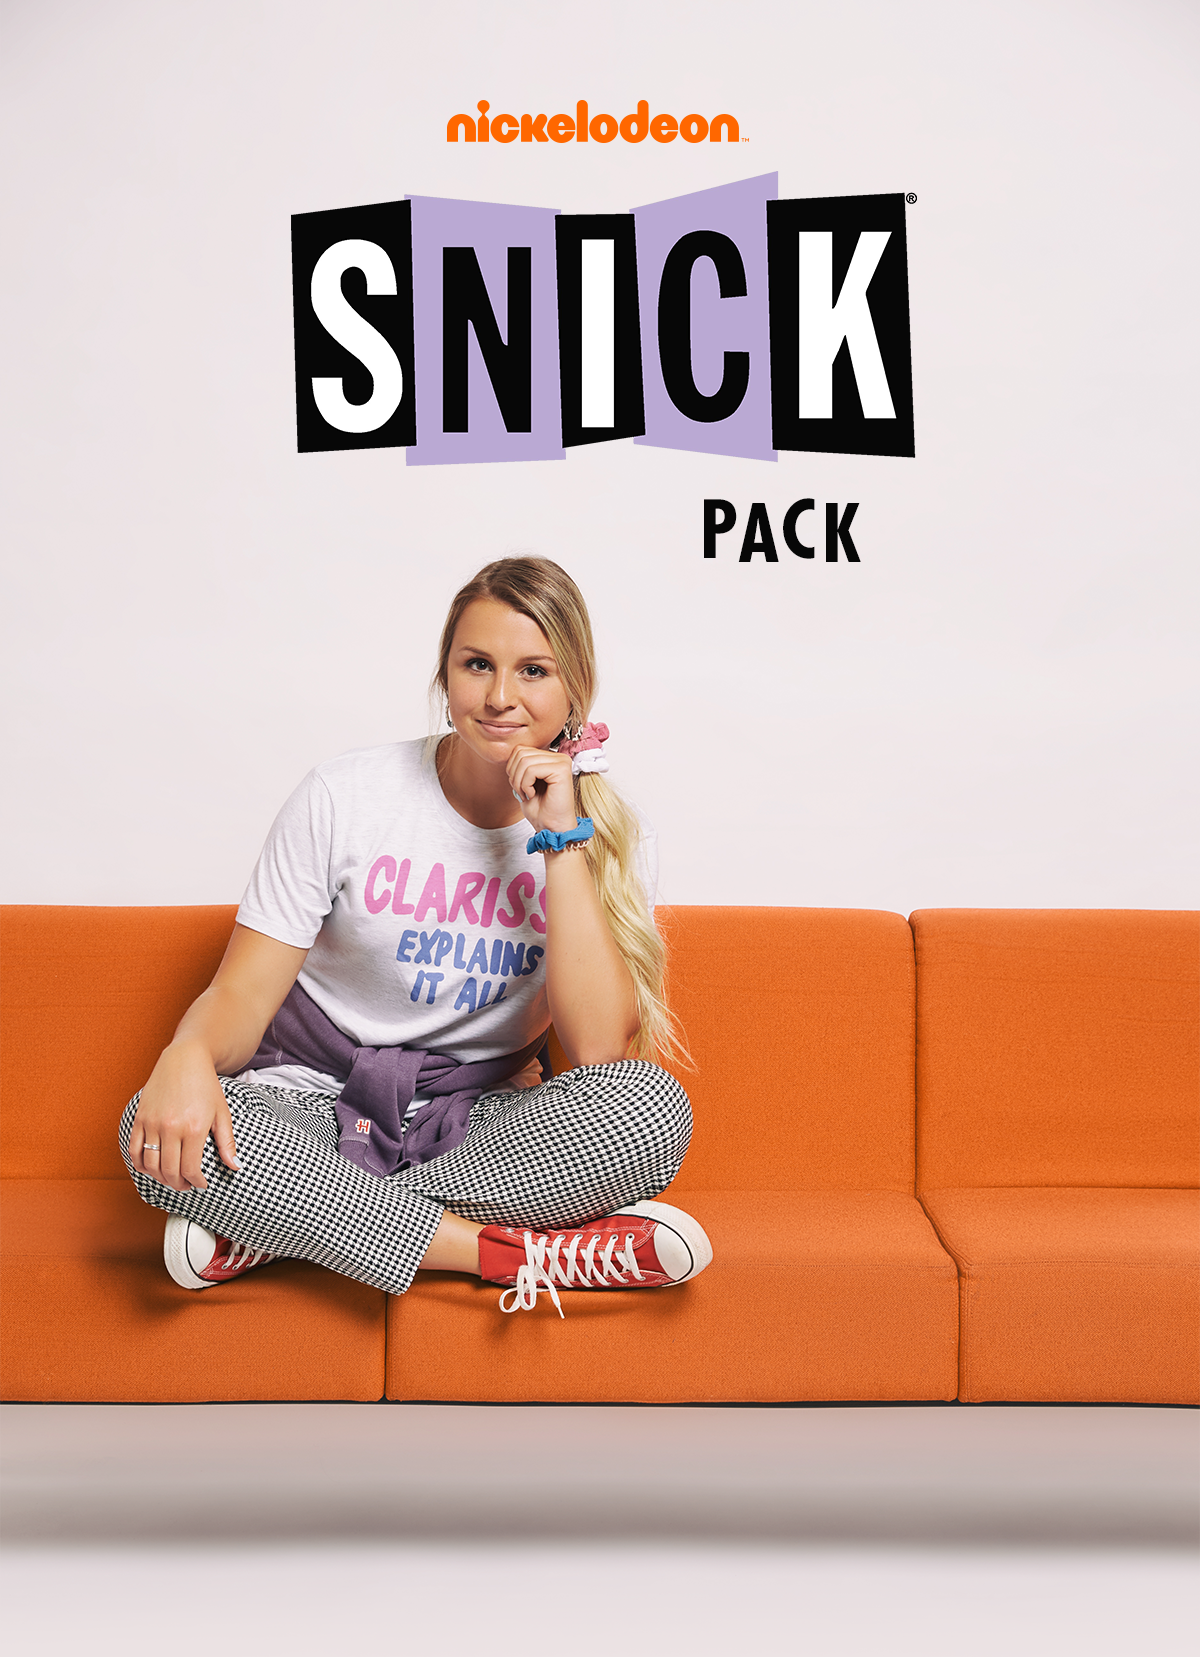 All New Nickelodeon SNICK pack from HOMAGE